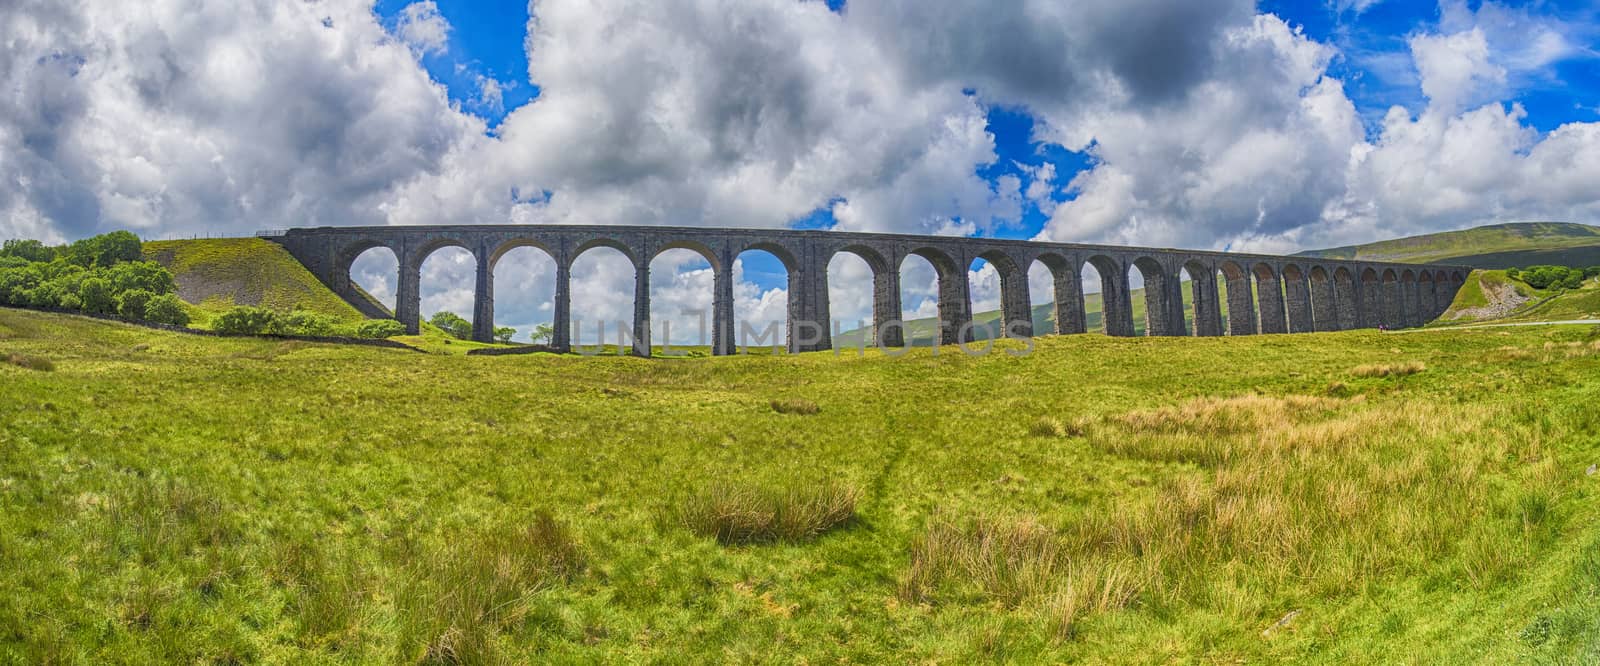 View of a large old Victorian railway viaduct across valley in rural countryside scenery panorama 